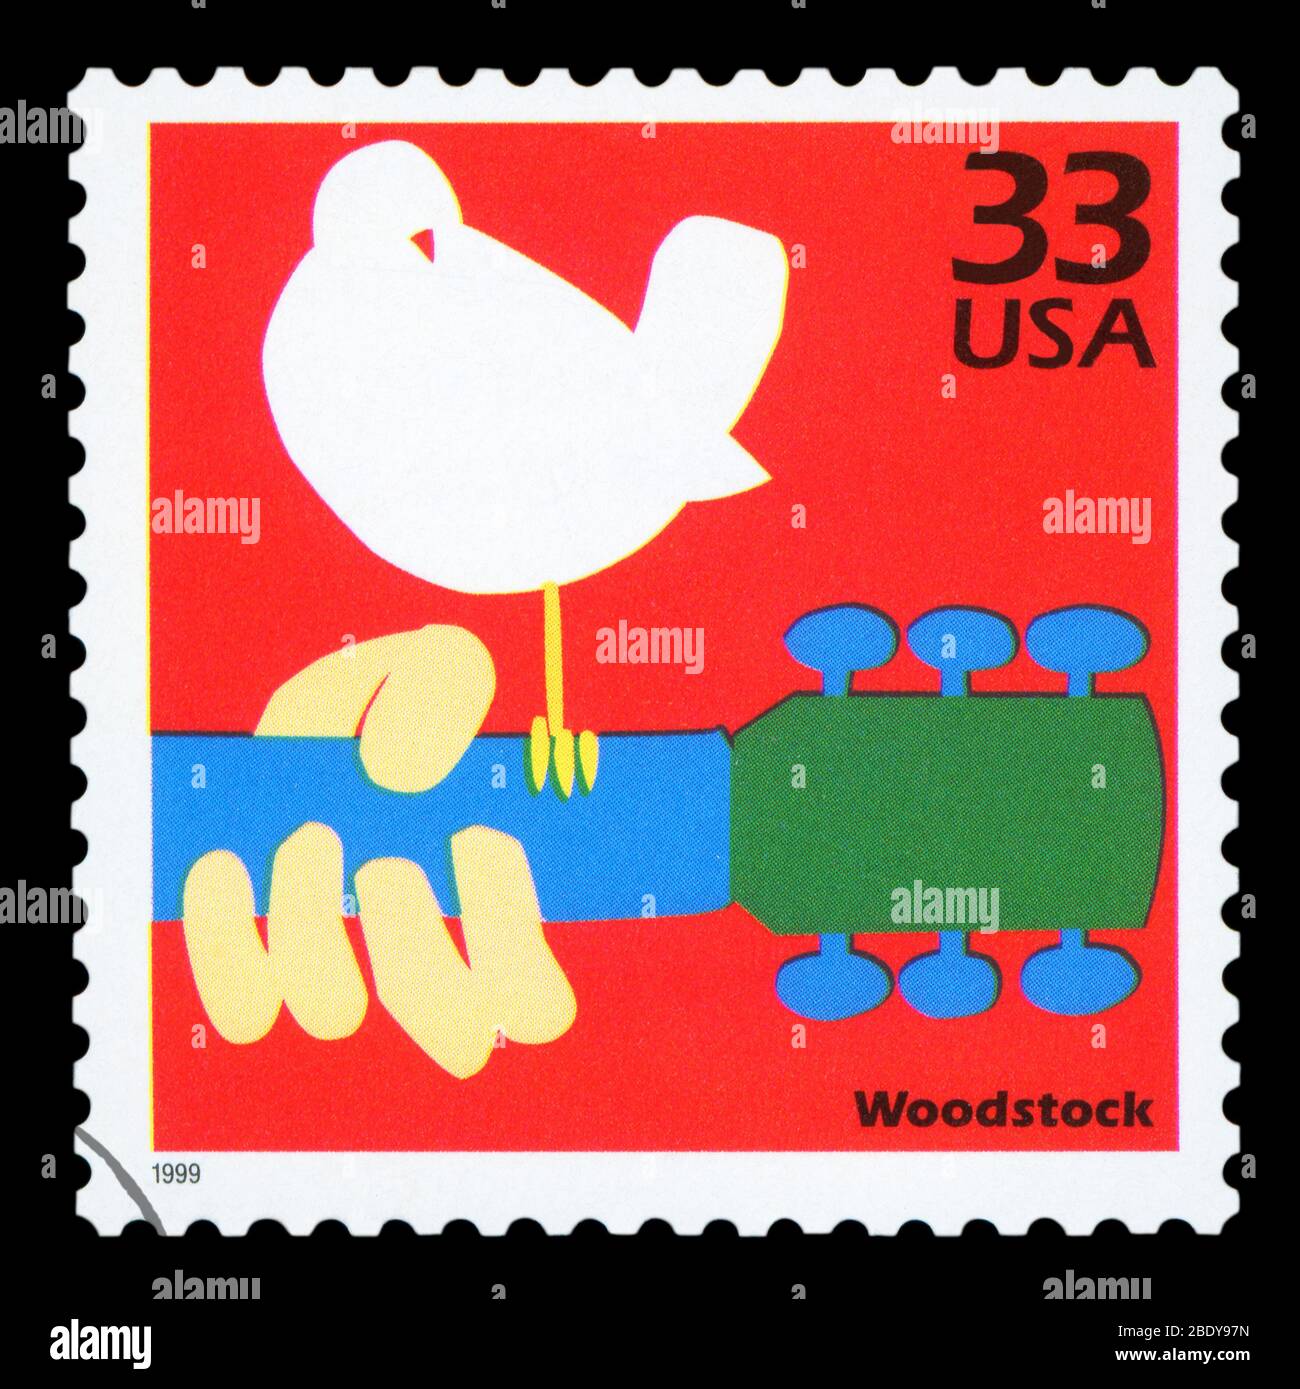 UNITED STATES OF AMERICA - CIRCA 1999: Stamp printed in USA dedicated to celebrate the century 1960s, shows Woodstock, circa 1999. Stock Photo